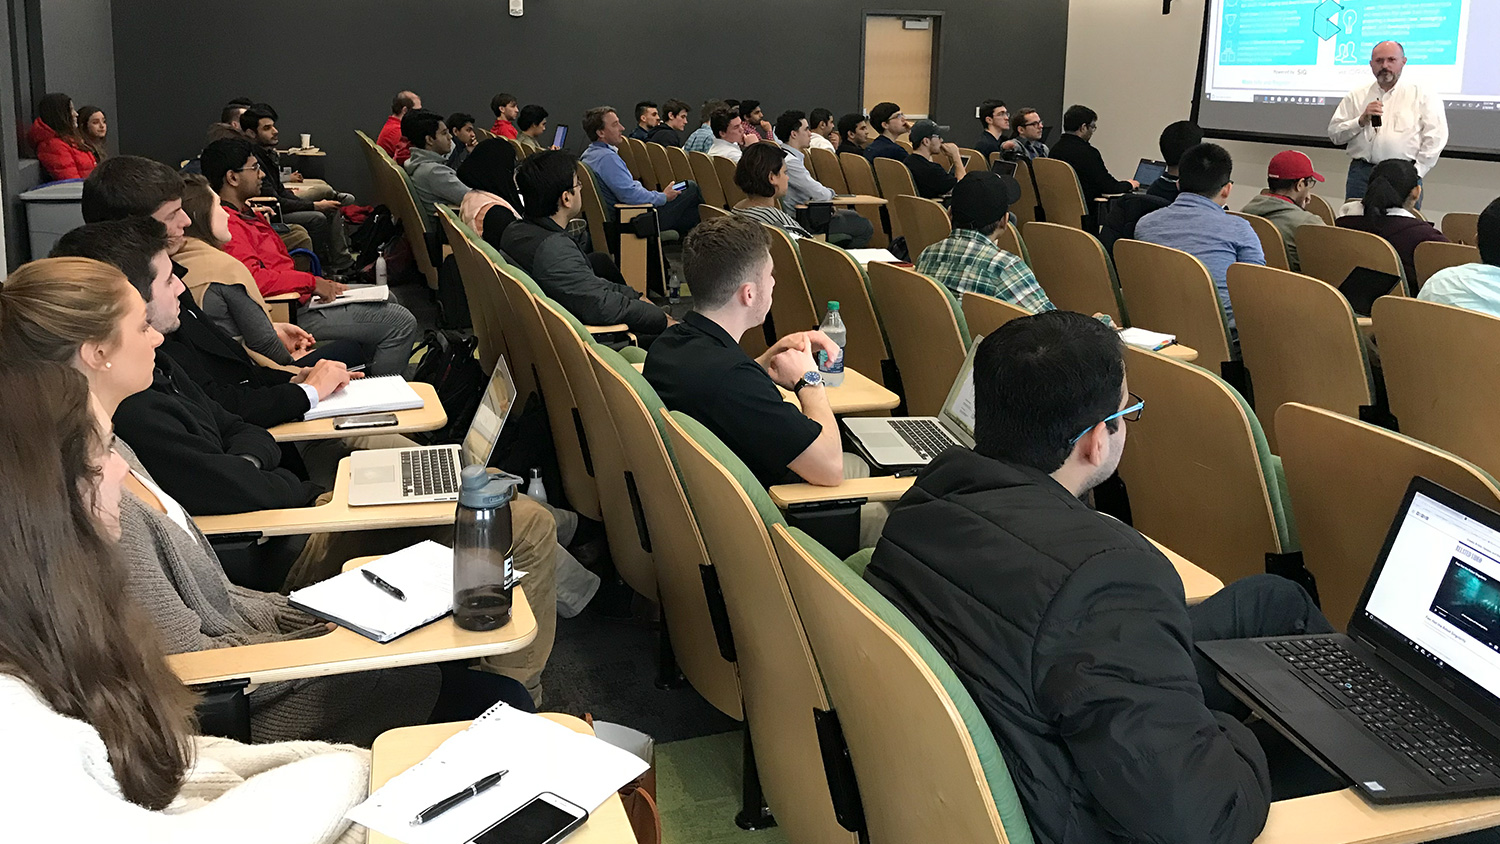 About 70 students and faculty members attended the blockchain training day presented by the Carolina Fintech Hub